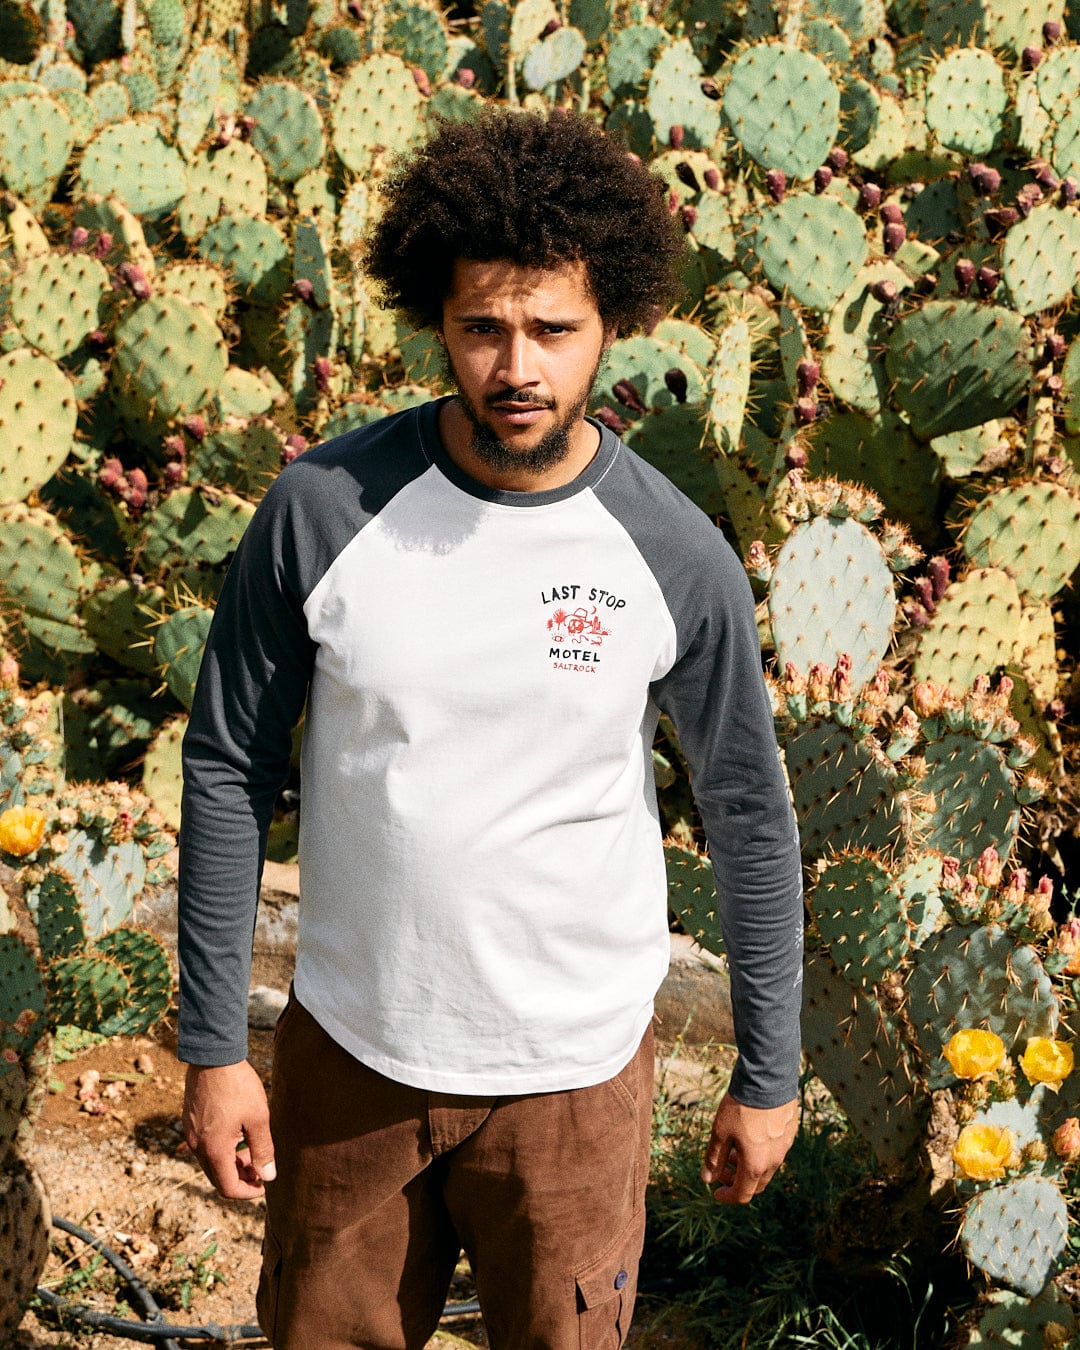 A man with curly hair stands in front of cacti, wearing a gray Saltrock Last Stop long sleeve raglan t-shirt and brown shorts.